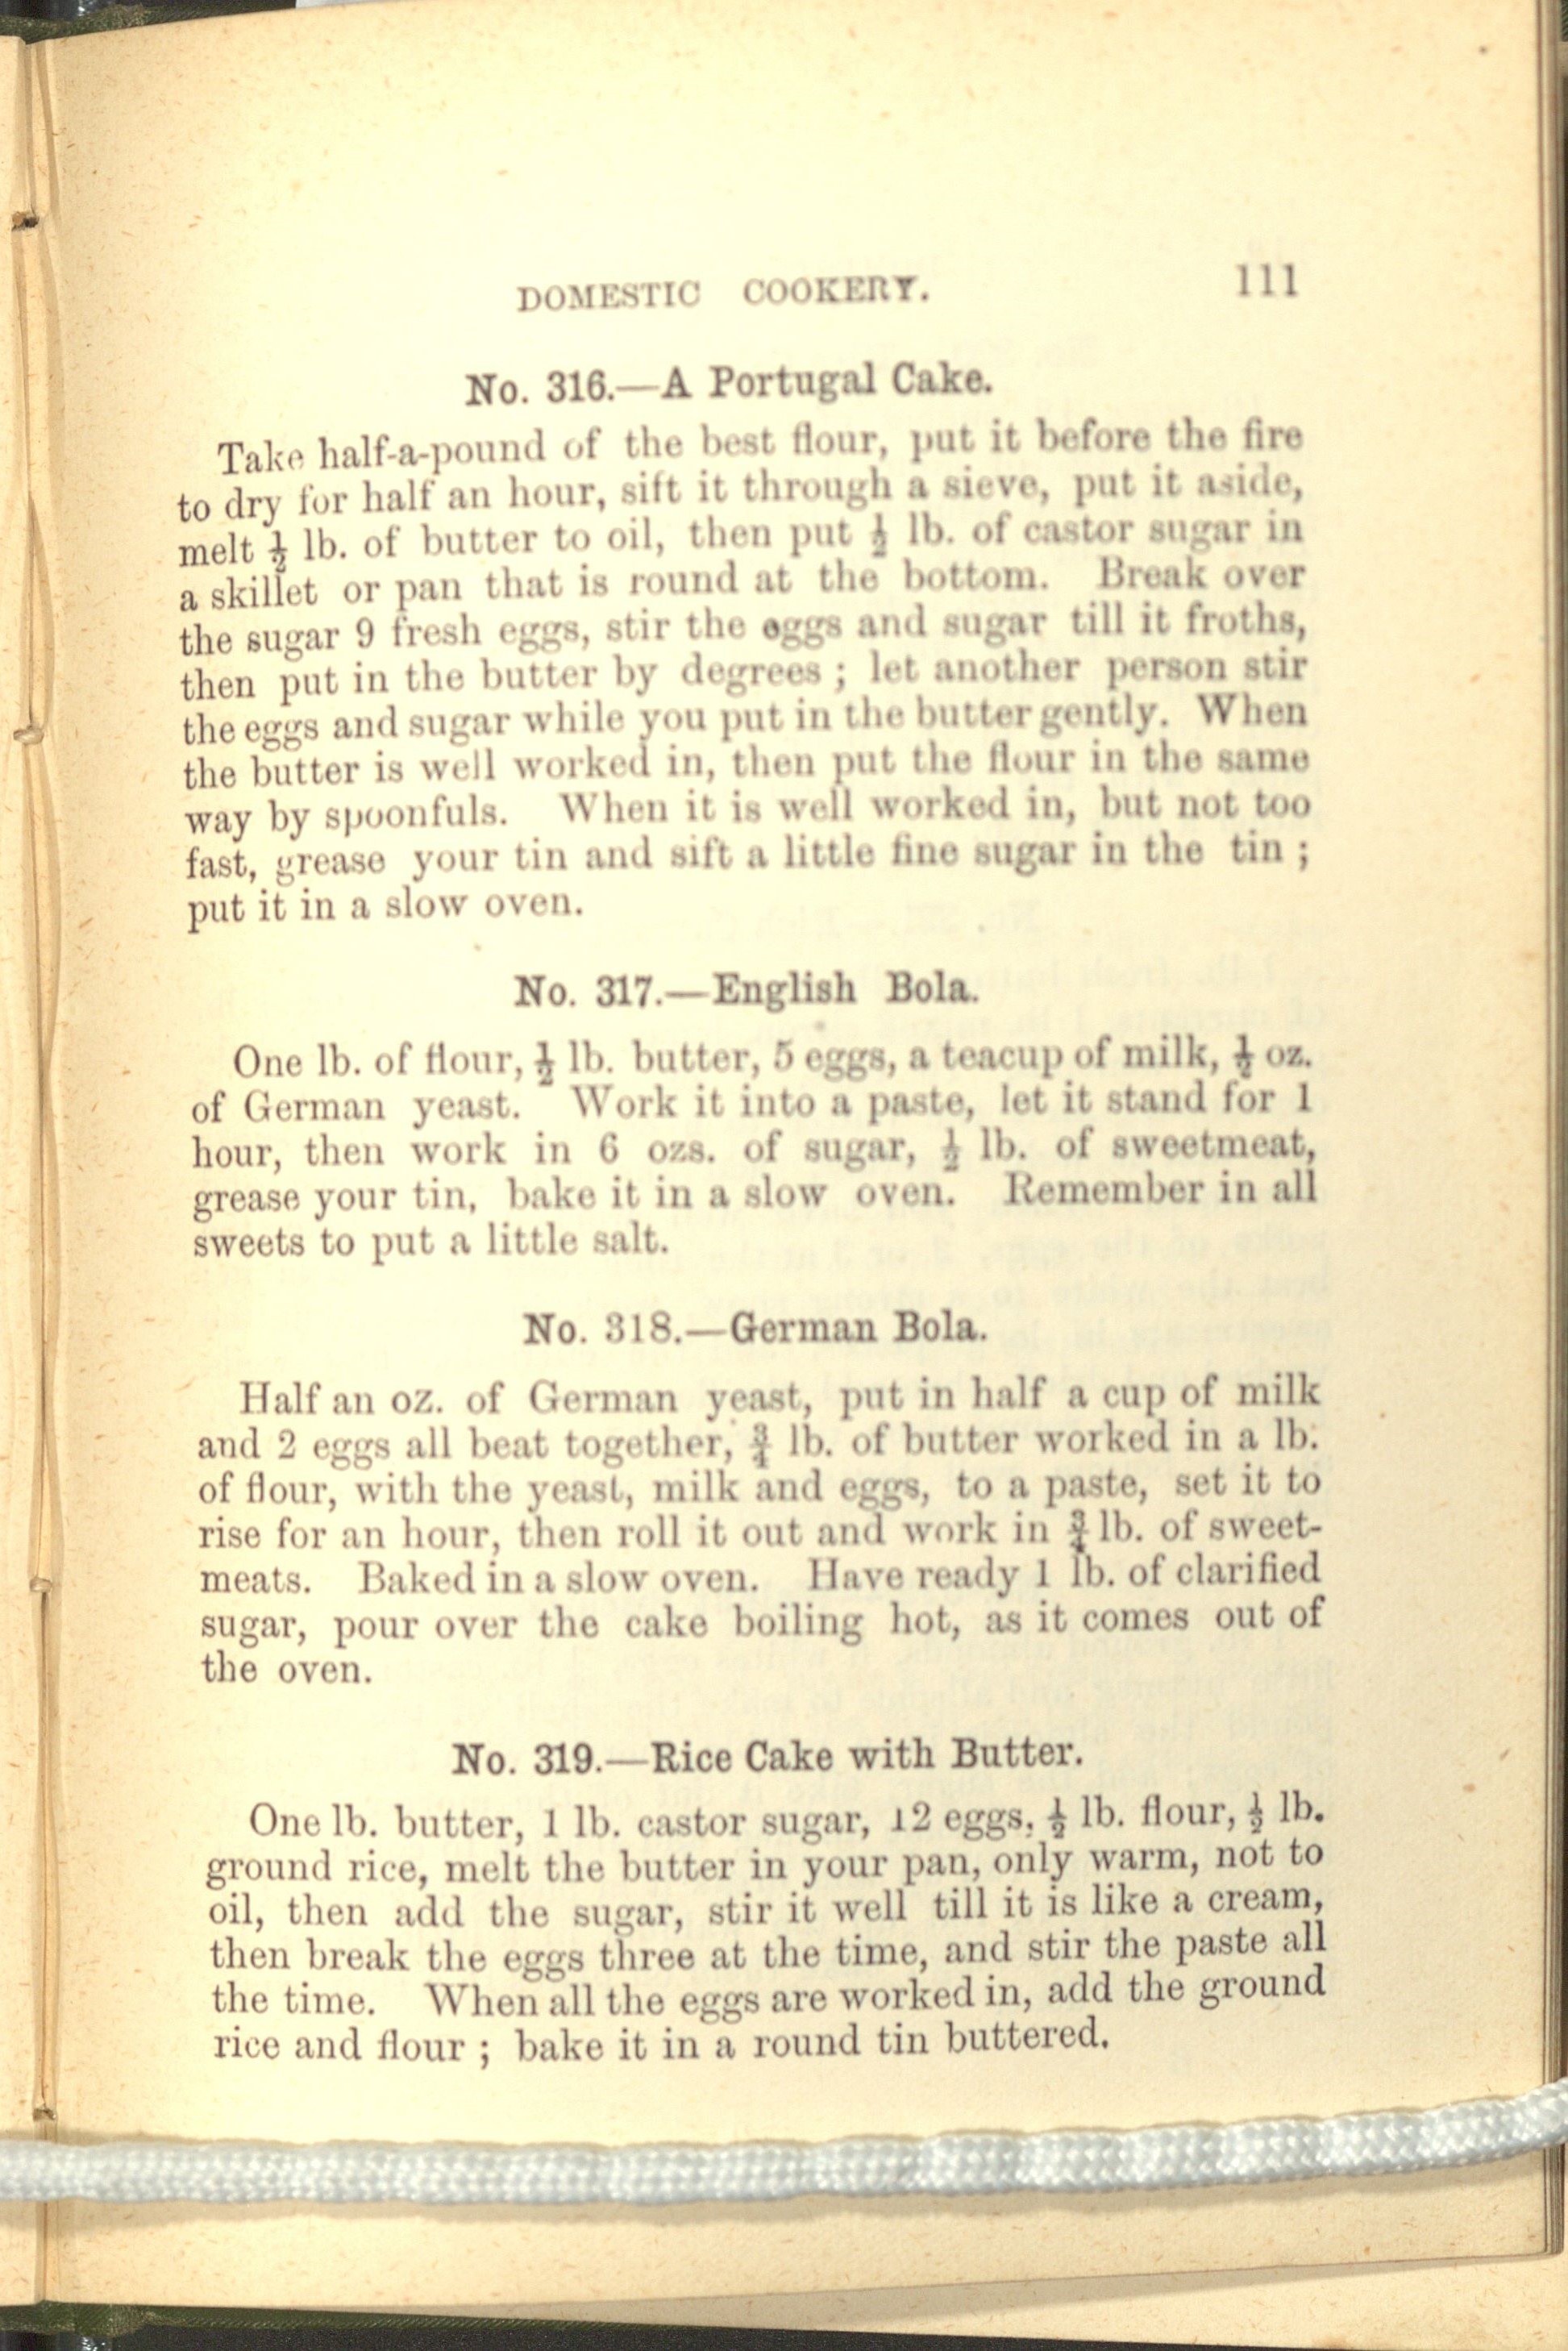 Page of the cookbook containing short, paragraph-form recipes for A Portugal Cake, English Bola, German Bola, and Rice Cake with Butter